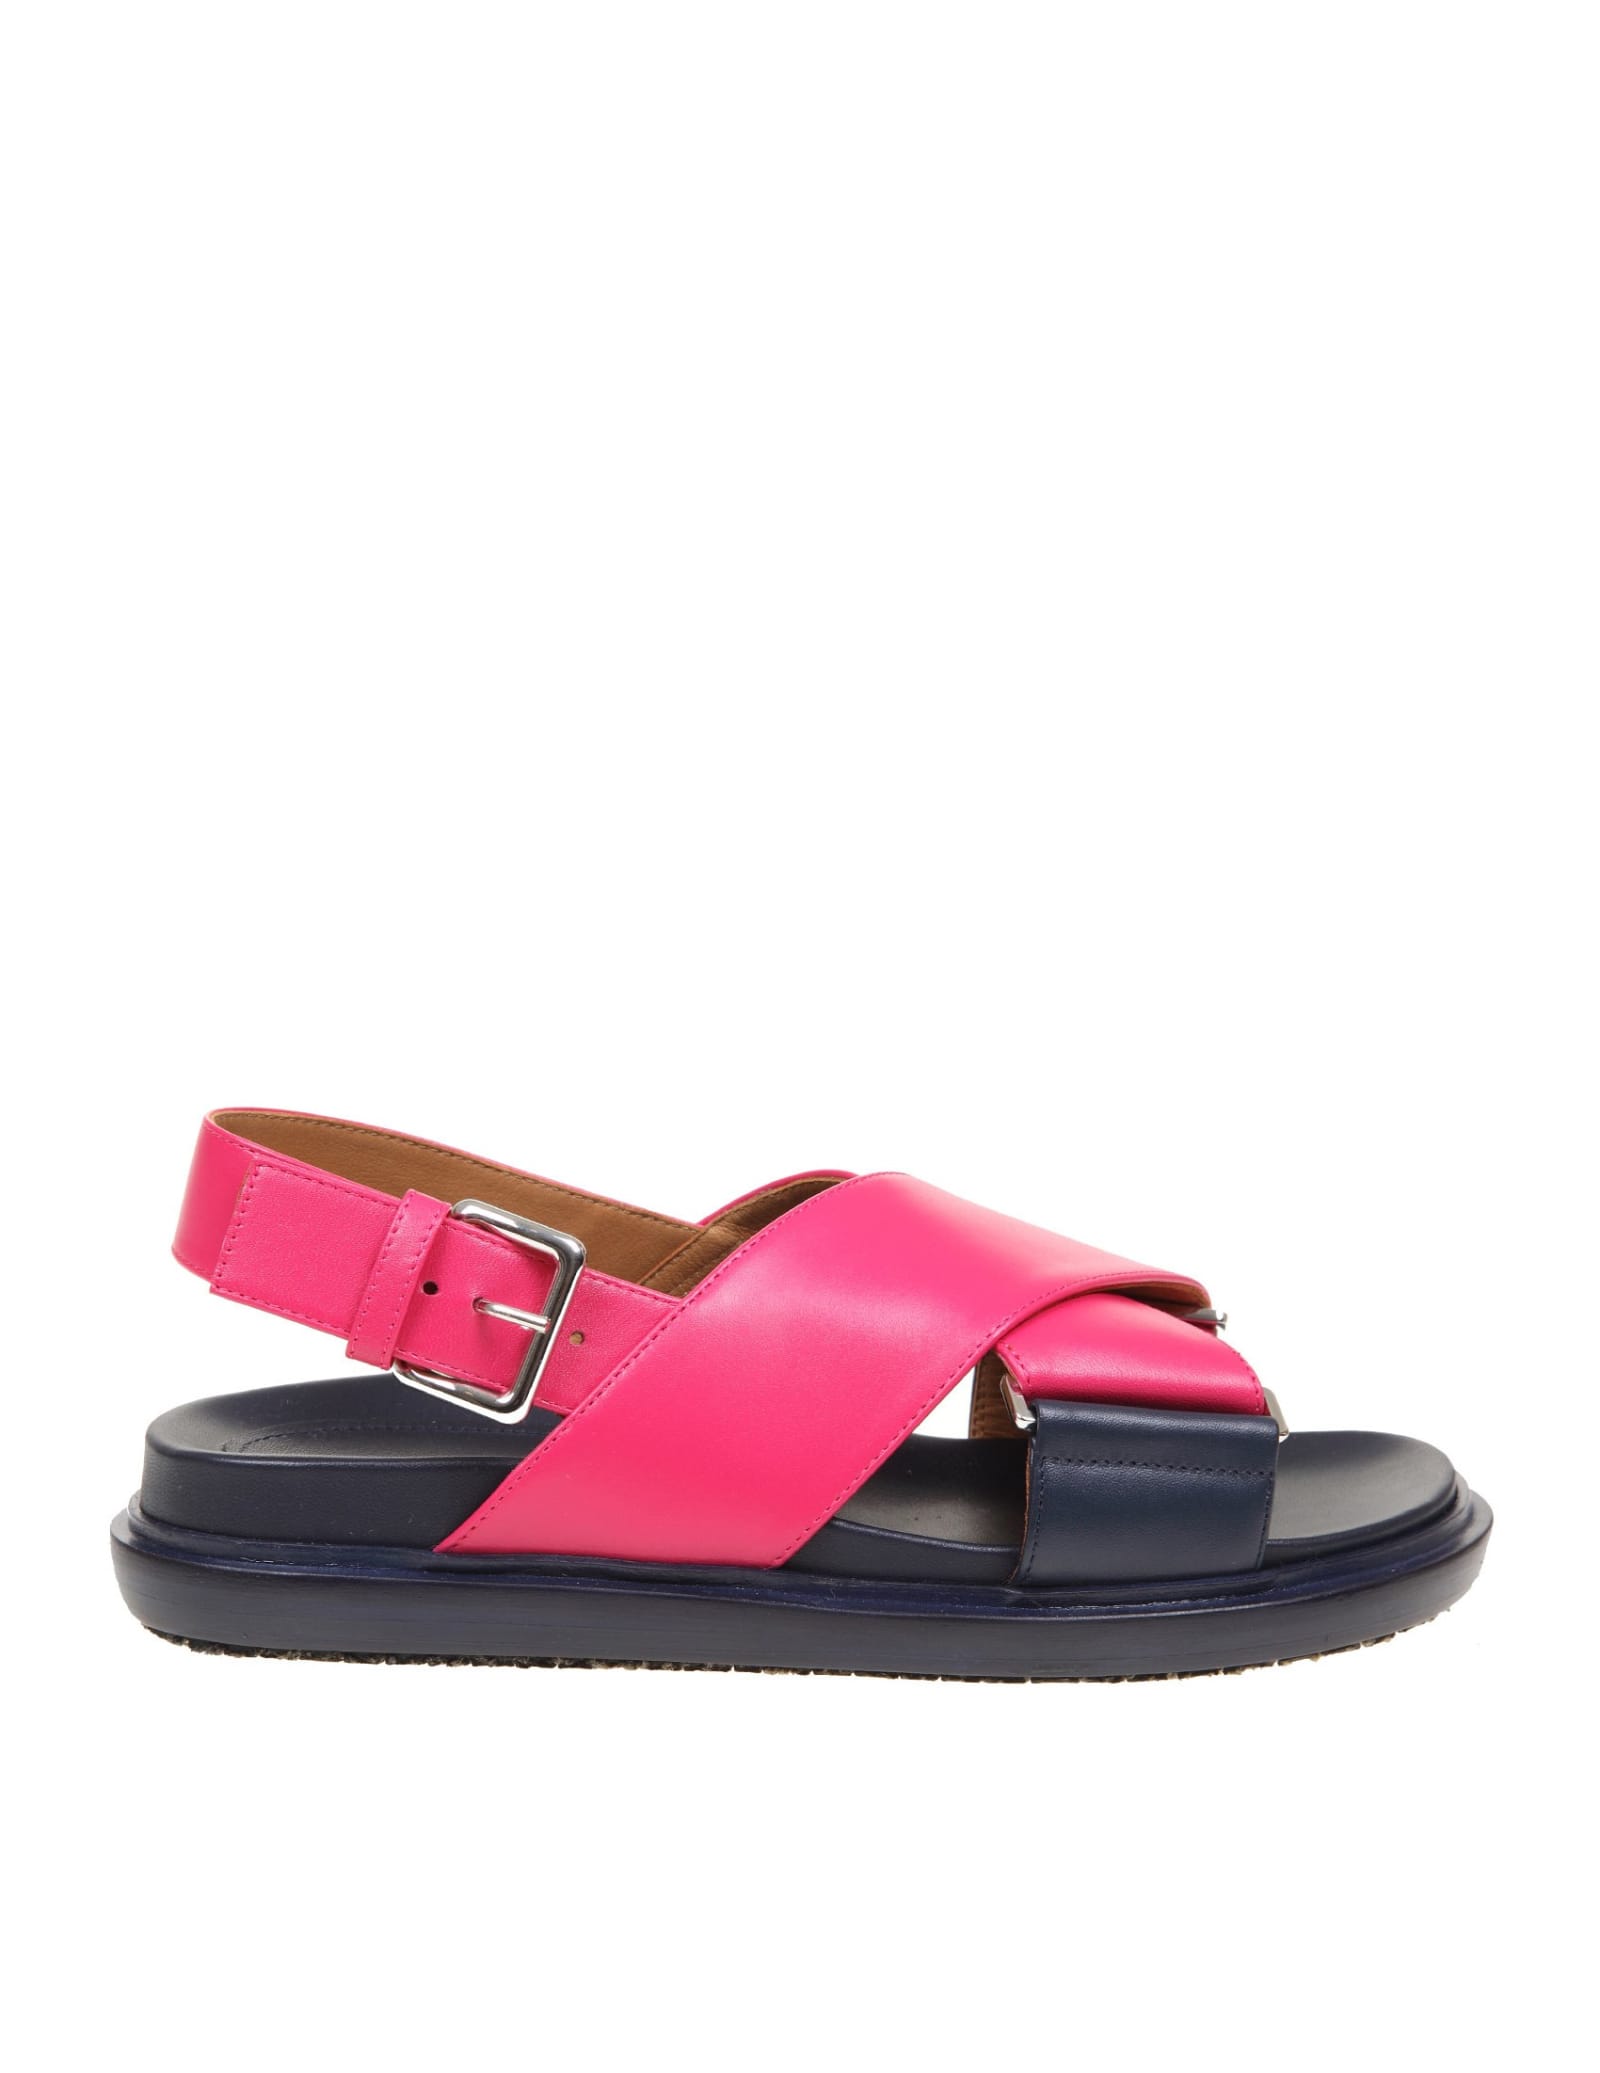 Buy Marni Fussbett Sandal In Fuchsia / Blue Leather online, shop Marni shoes with free shipping